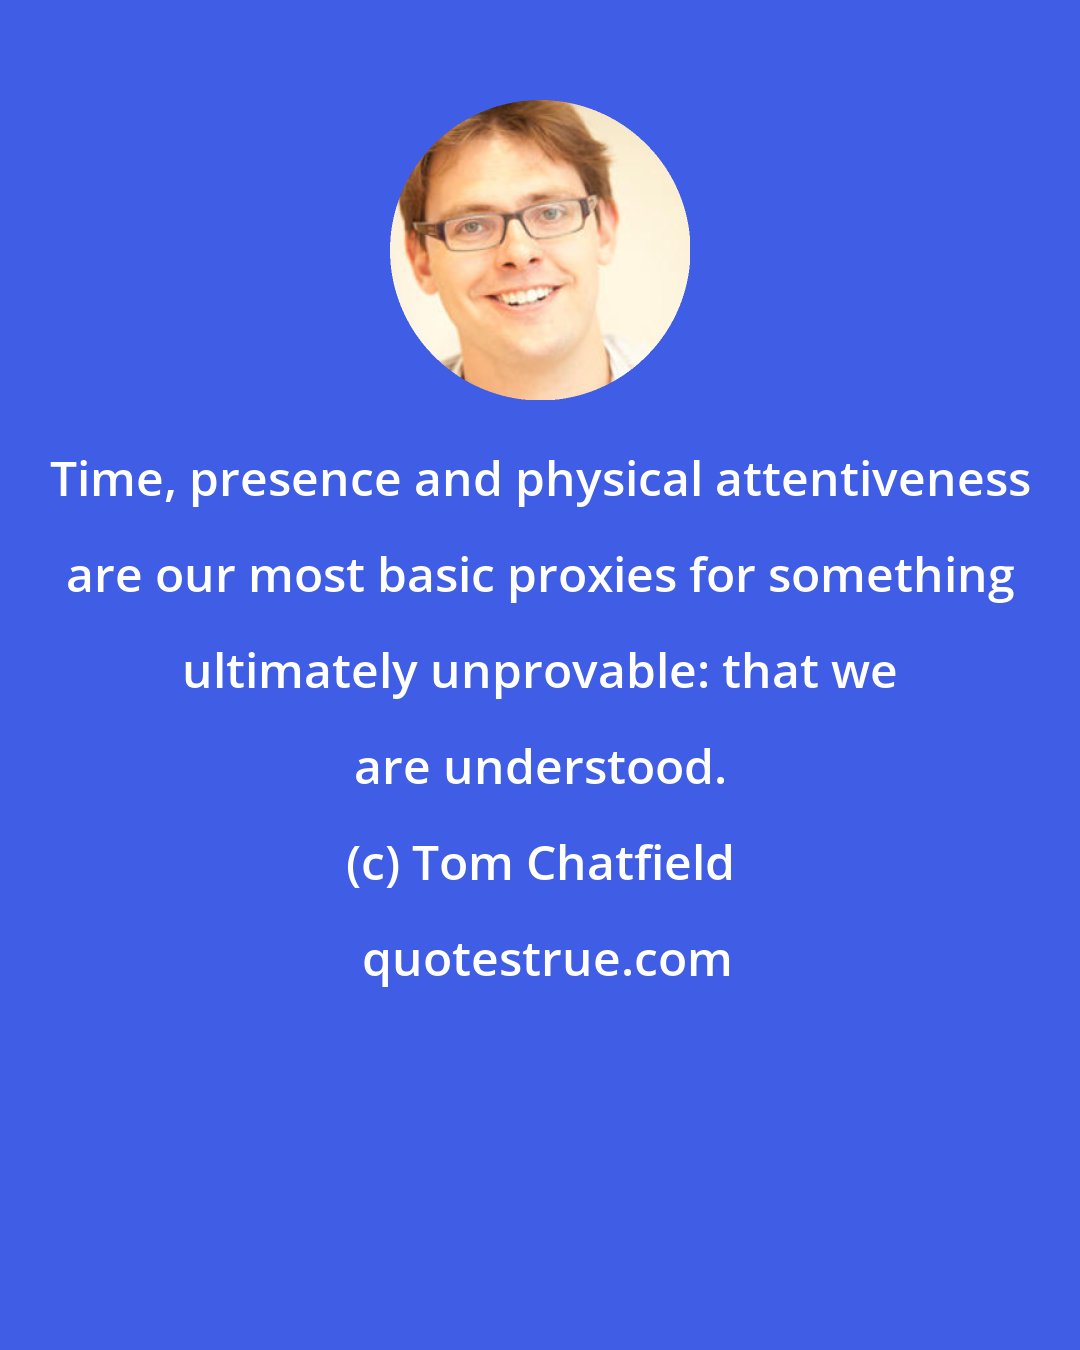 Tom Chatfield: Time, presence and physical attentiveness are our most basic proxies for something ultimately unprovable: that we are understood.